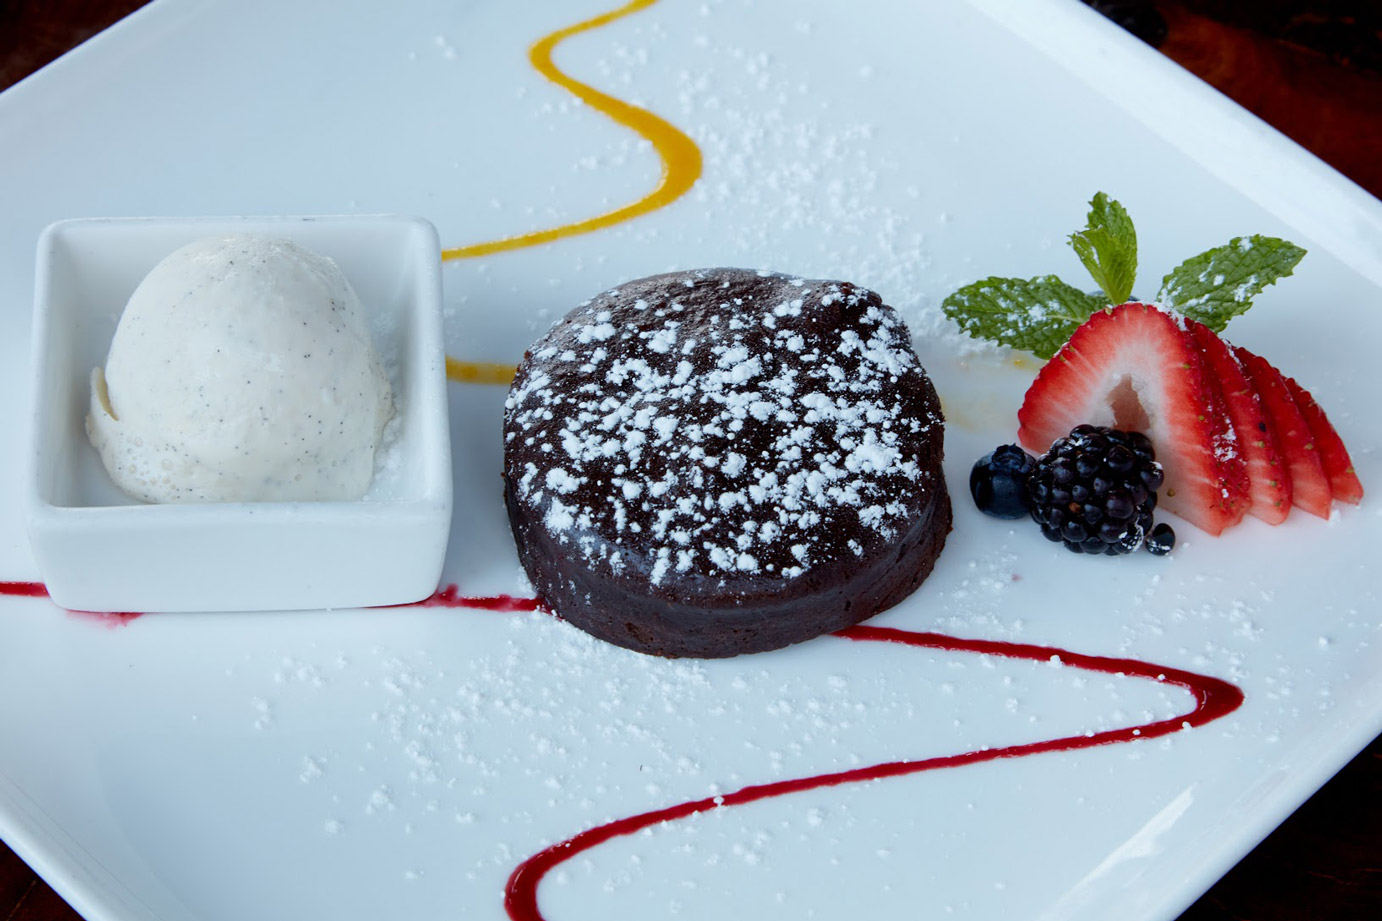 Chocolate yuzu cookie with berries and a scoop of ice cream